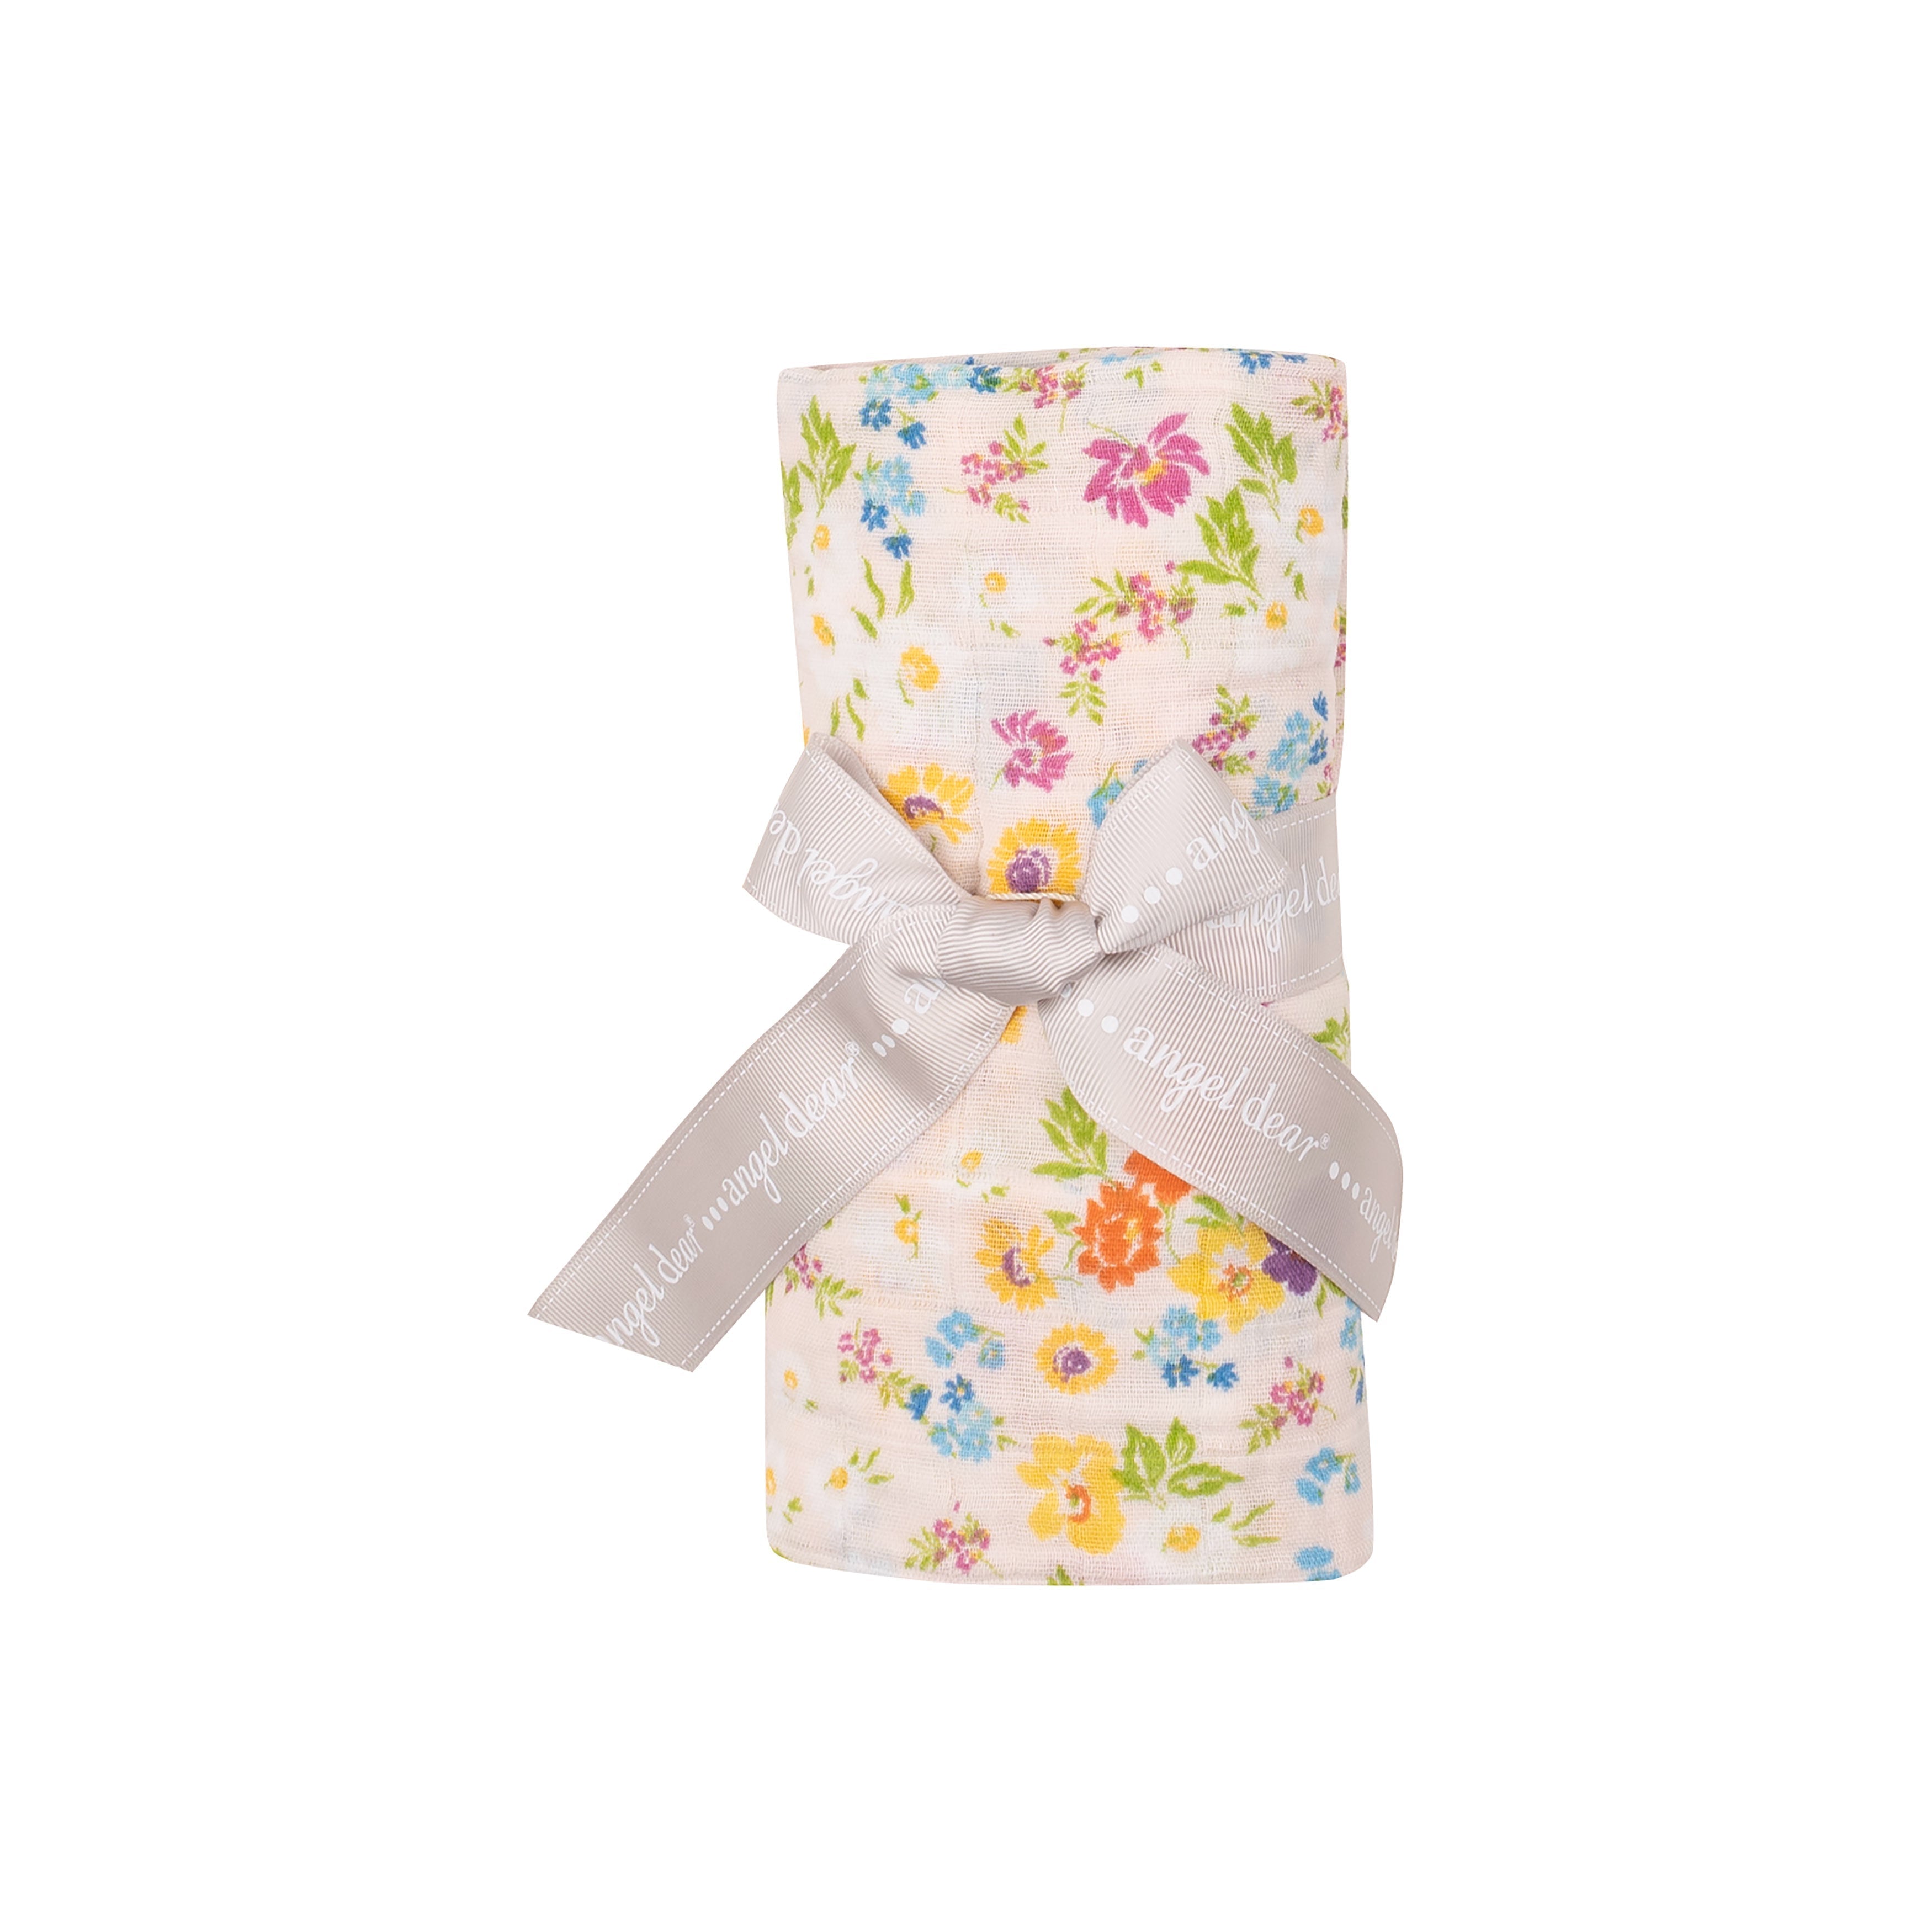 Swaddle Blanket - Cheery Mix Floral